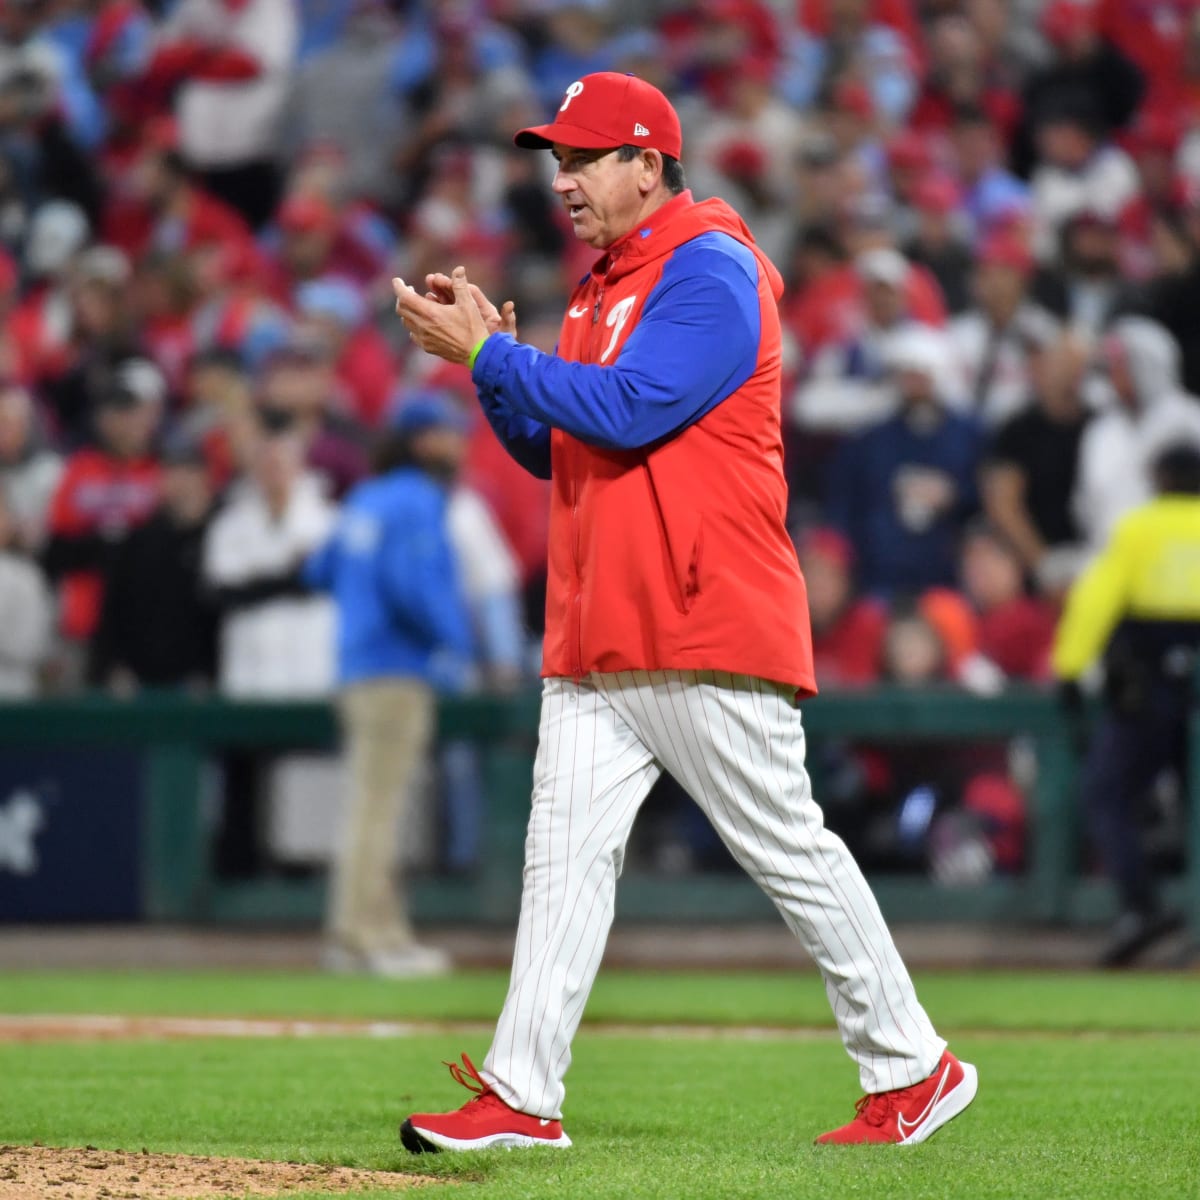 Rob Thomson is more than just a manager letting the Phillies be themselves  - Crossing Broad